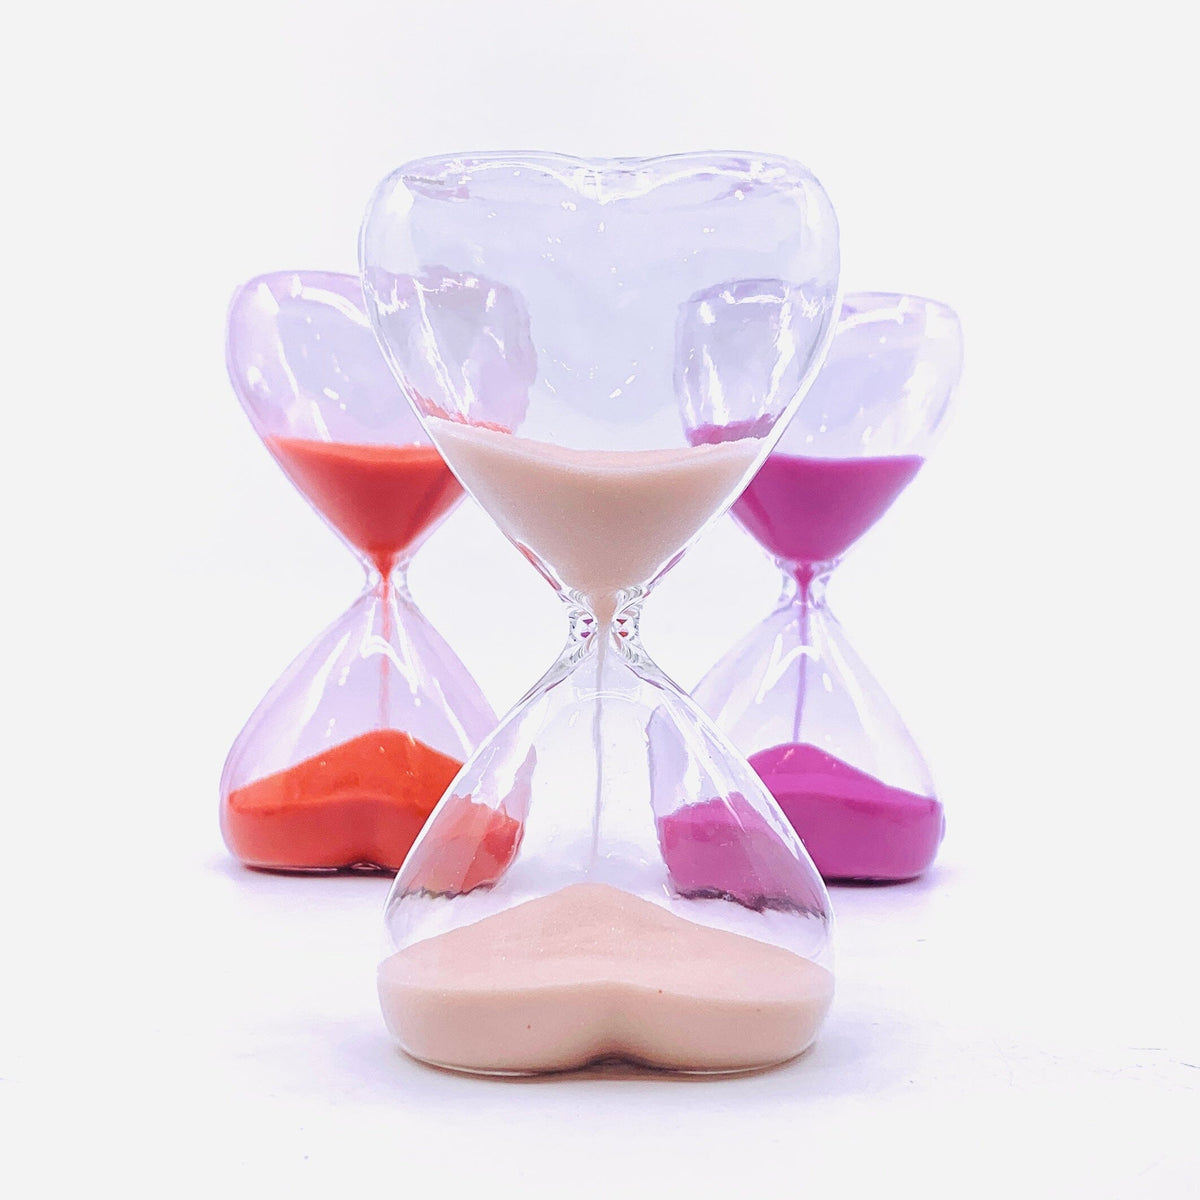 Time For Love - Valentines Heart Hour Glass, Red Decor One Hundred 80 Degrees 